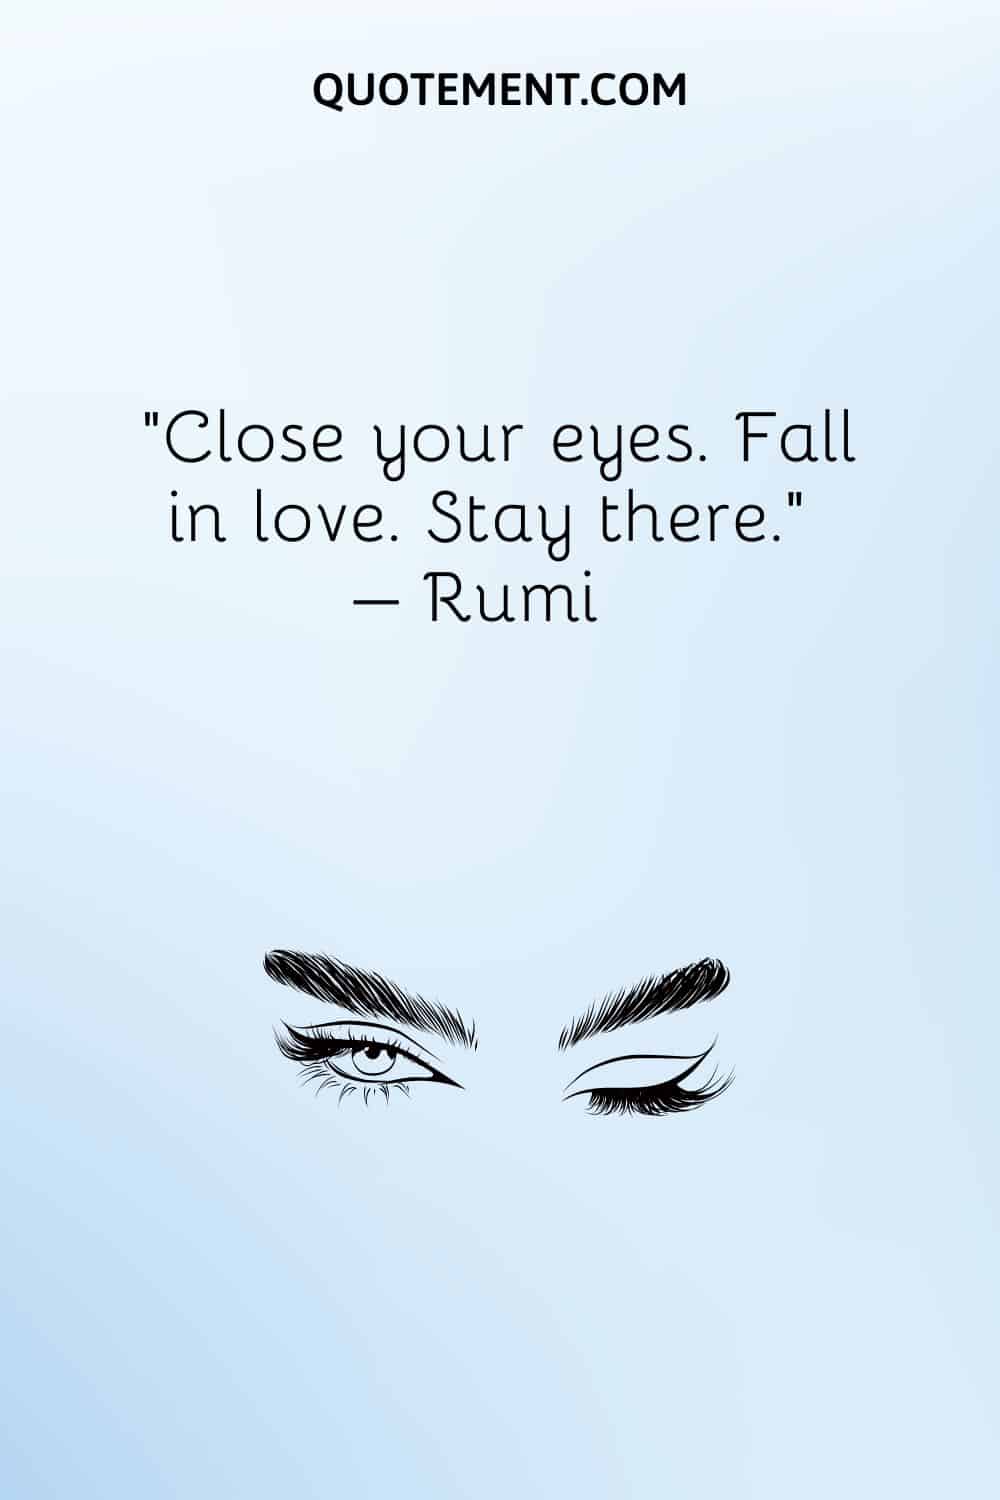 Close your eyes. Fall in love. Stay there